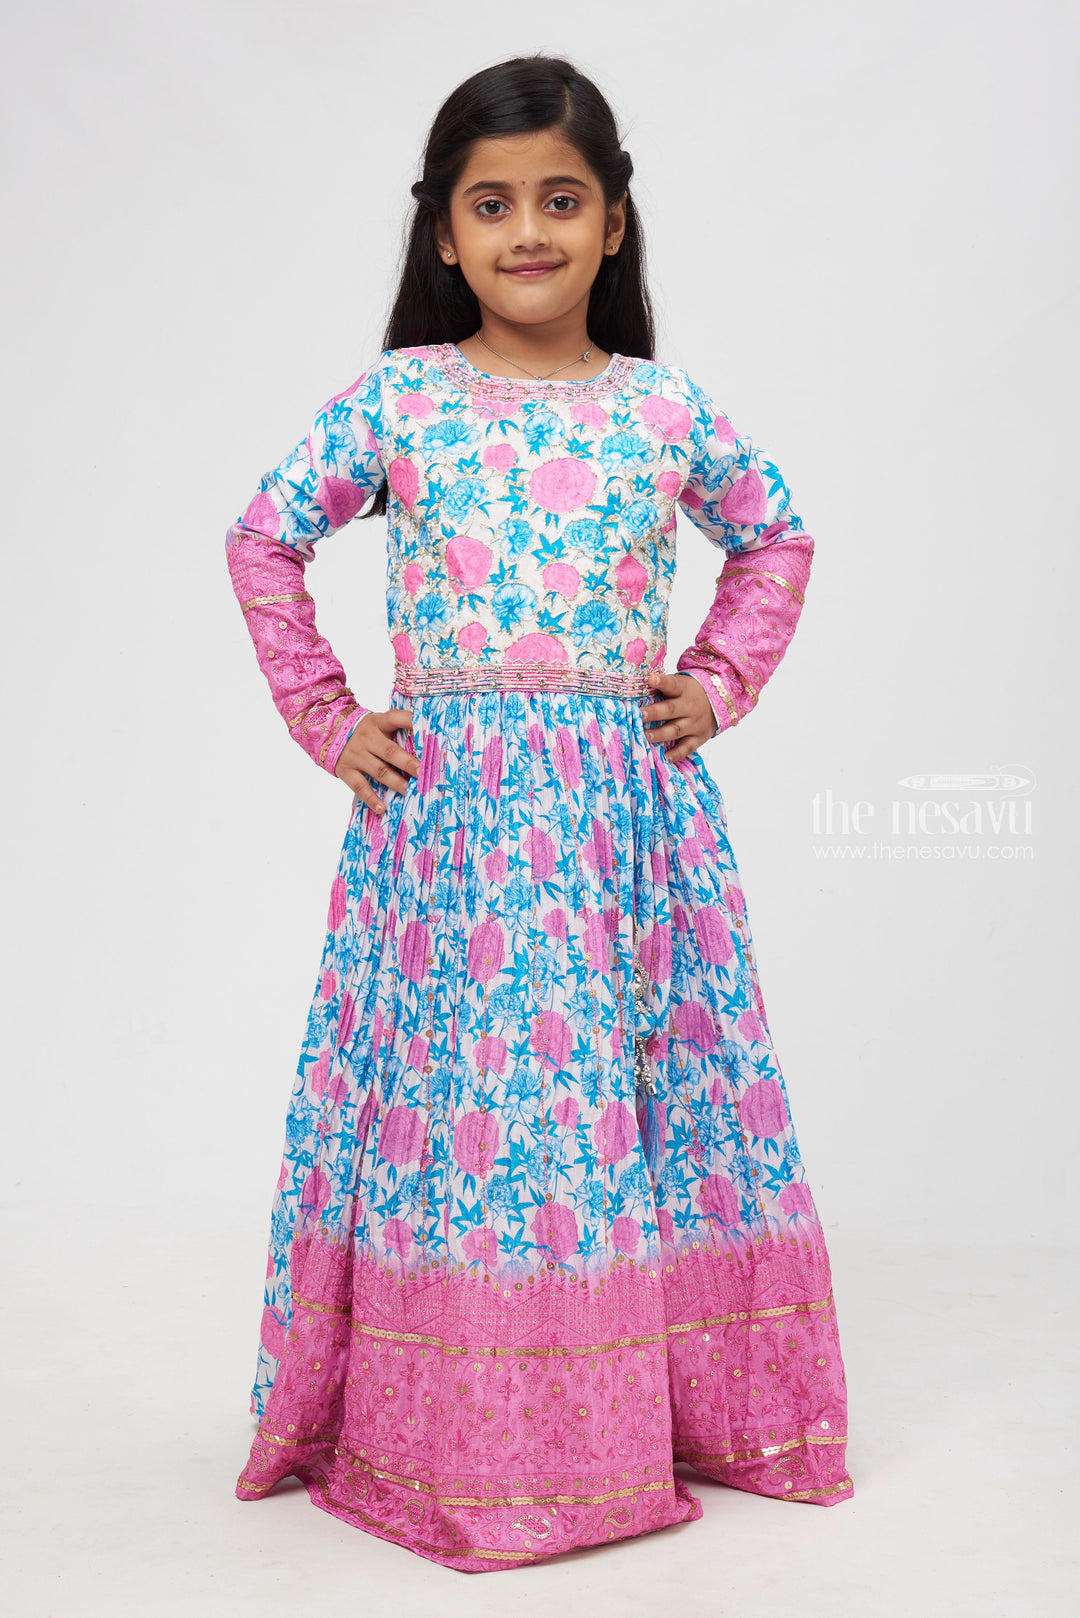 The Nesavu Girls Party Gown Exquisite Pearl Embroidered Floral Designer Pink Anarkali Gown for Girls- Diwali 2023 New Collection Nesavu 22 (4Y) / Pink / Chinnon GA152A-22 Pearl Embroidered Floral Designer Pink Anarkali Gown | Festive Elegance for Girls | The Nesavu